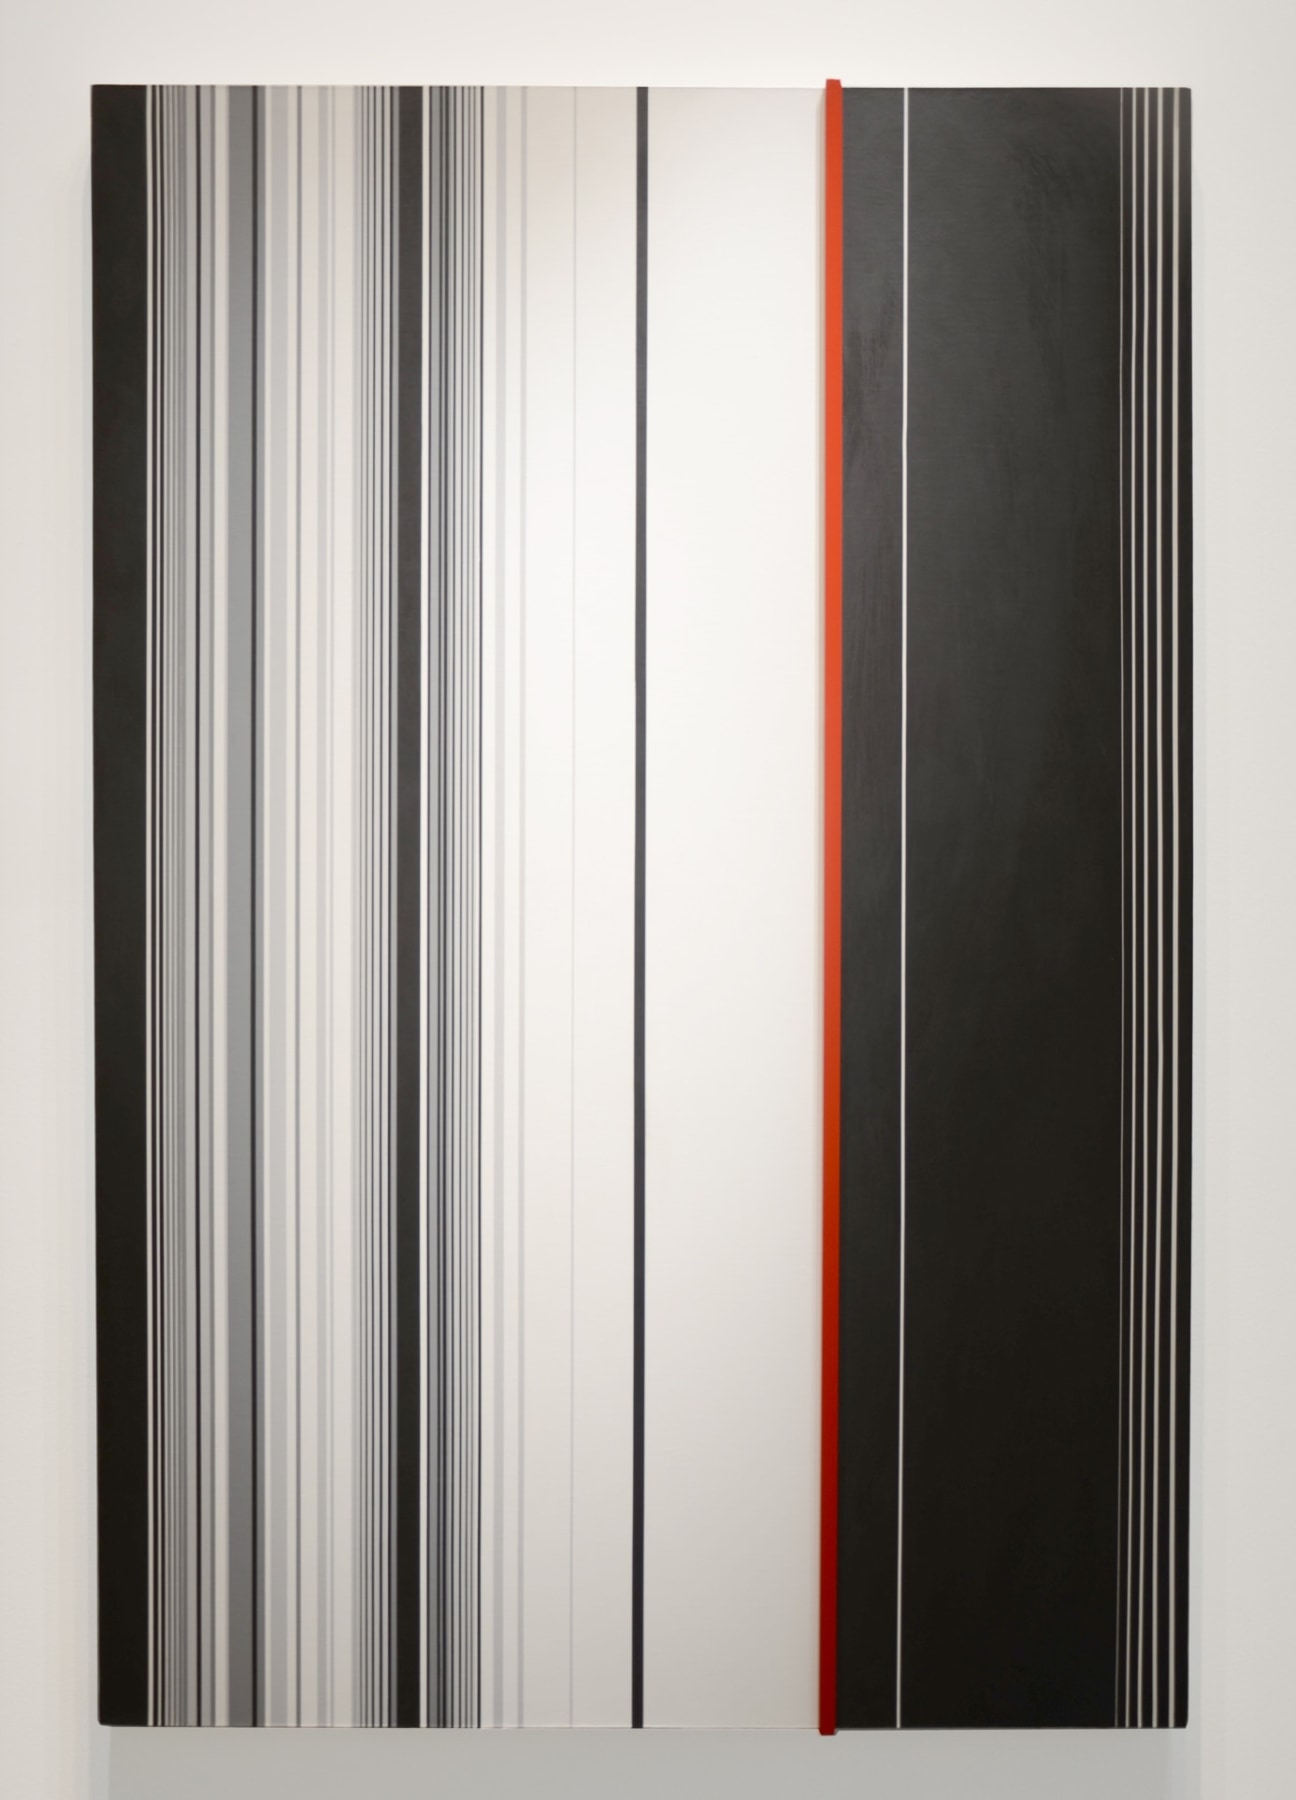 Cui_Xiuwen_Reincarnation_No15_Varnished_Aluminum_and_Acrylic_on_Canvas_100x150cm_2015